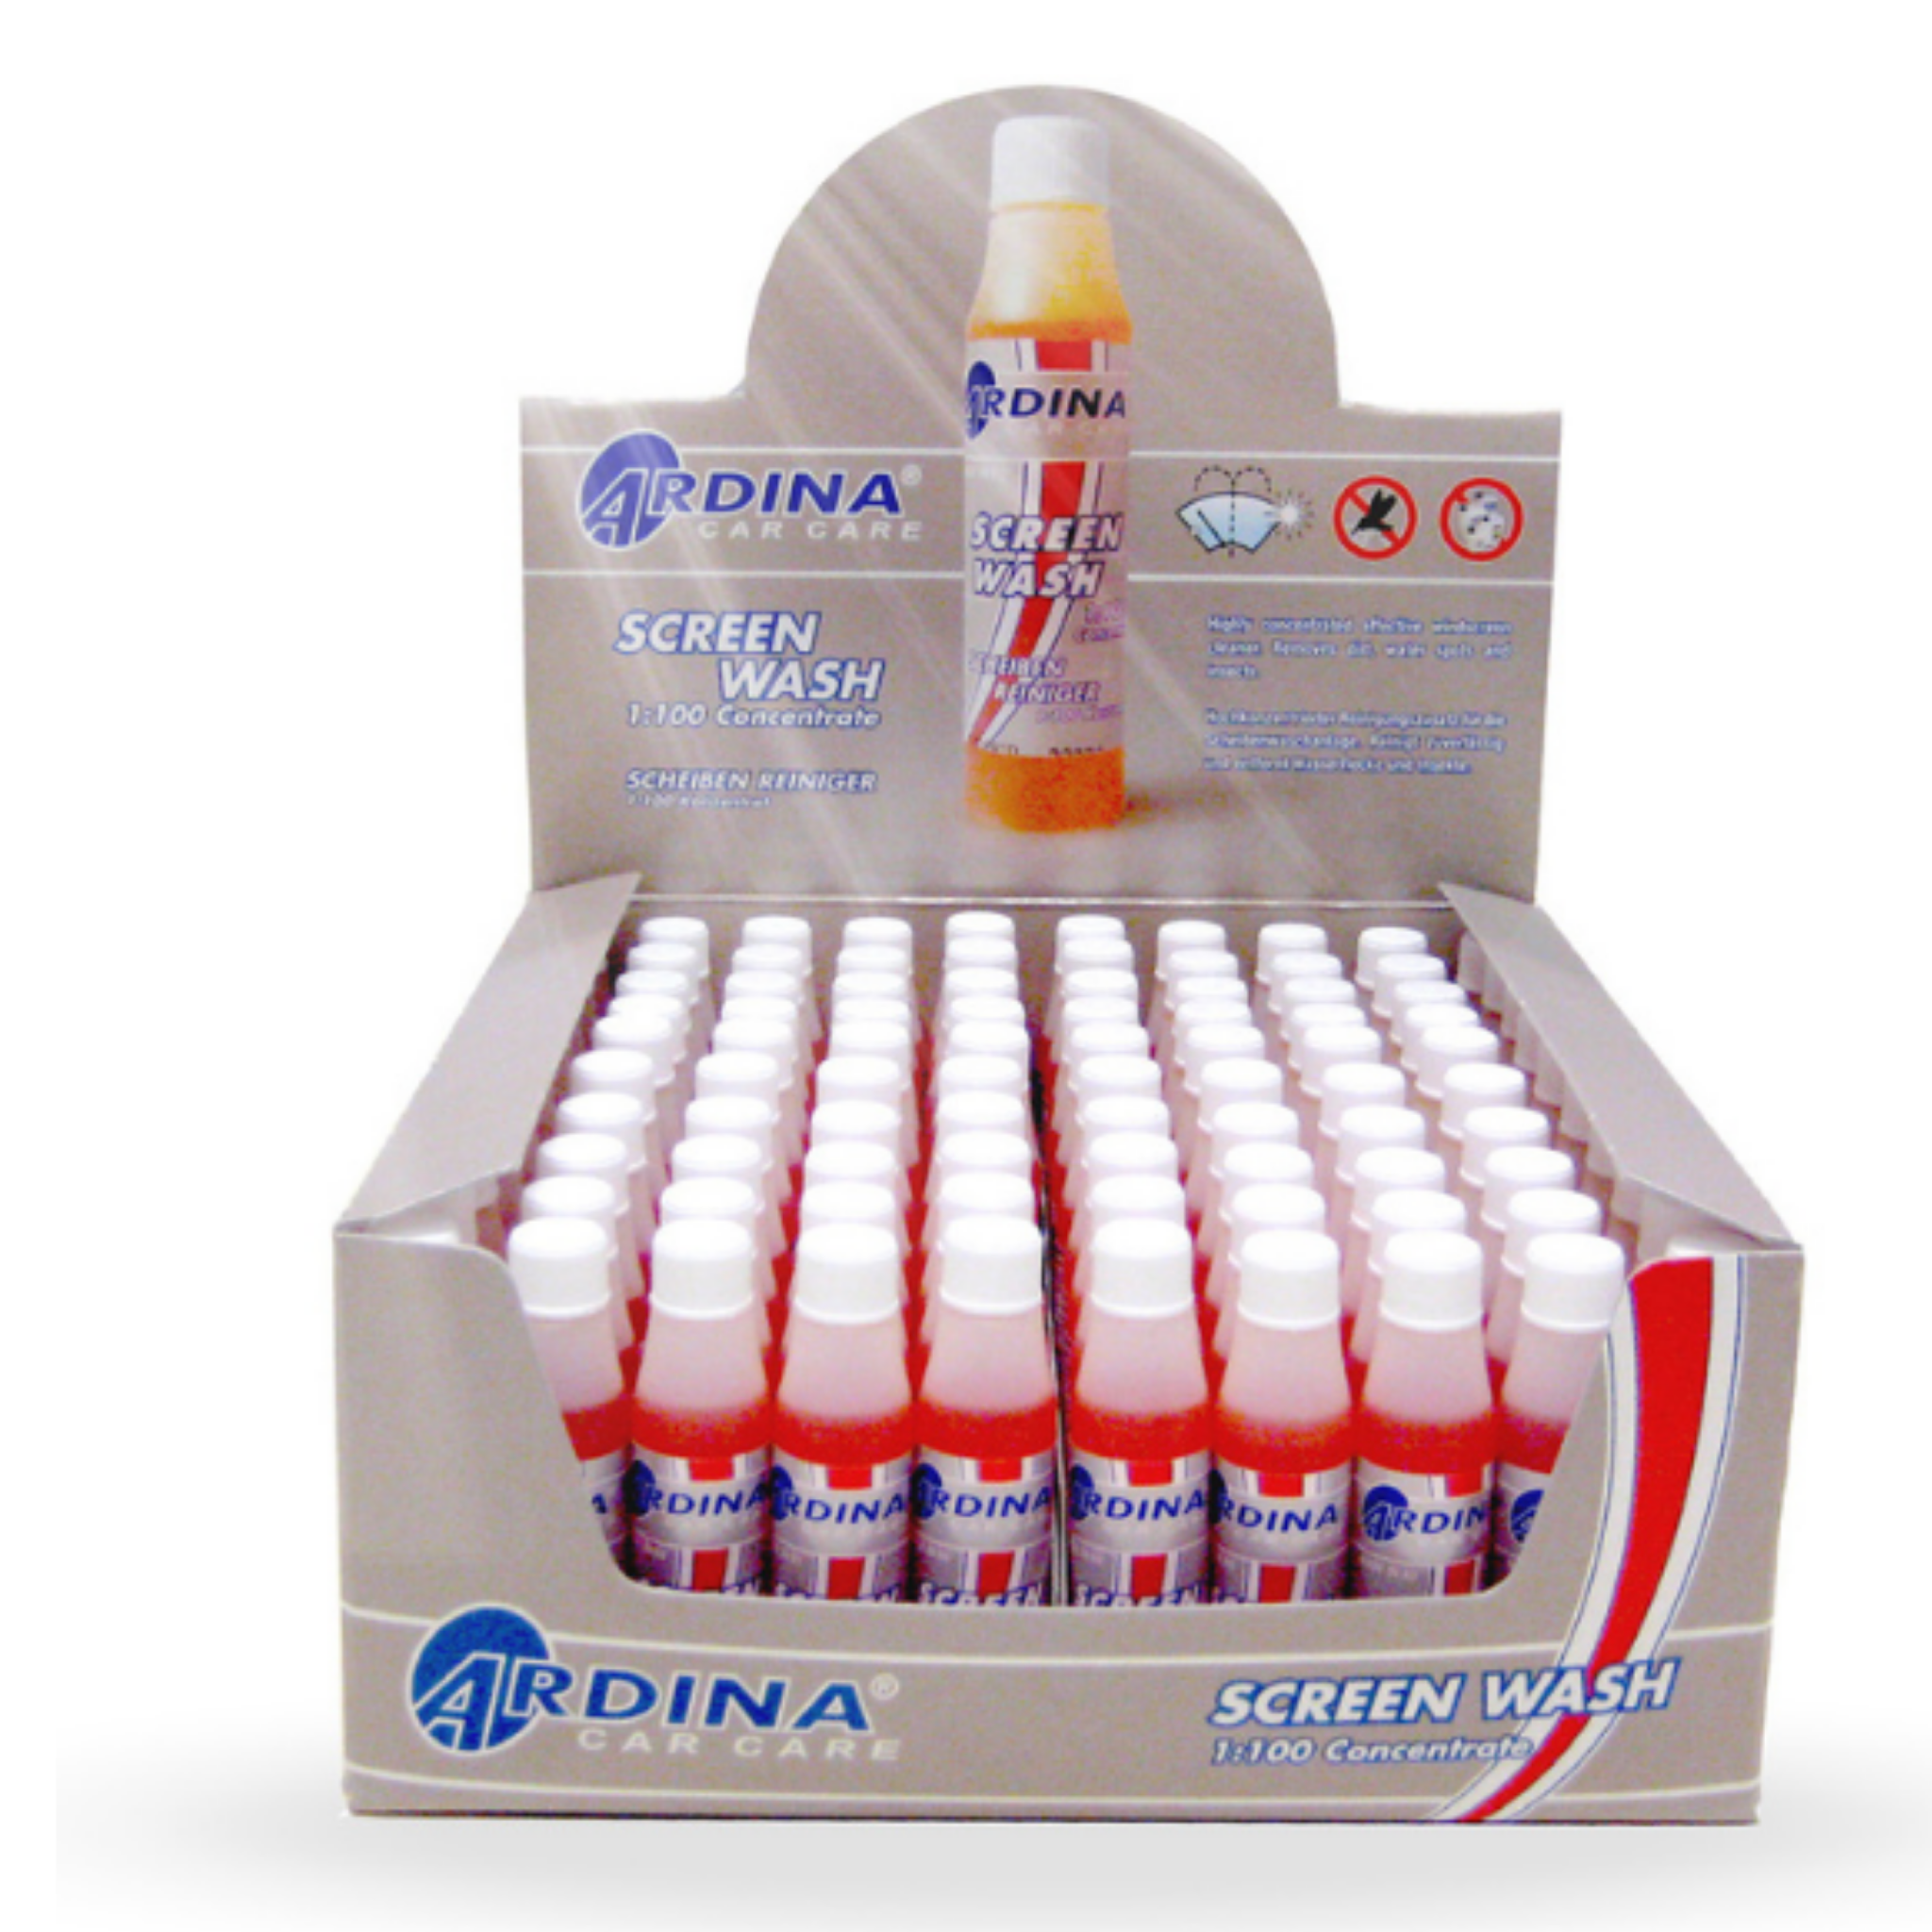 Ardina 32ml Screen Wash 1:100 Concentrate DSL62